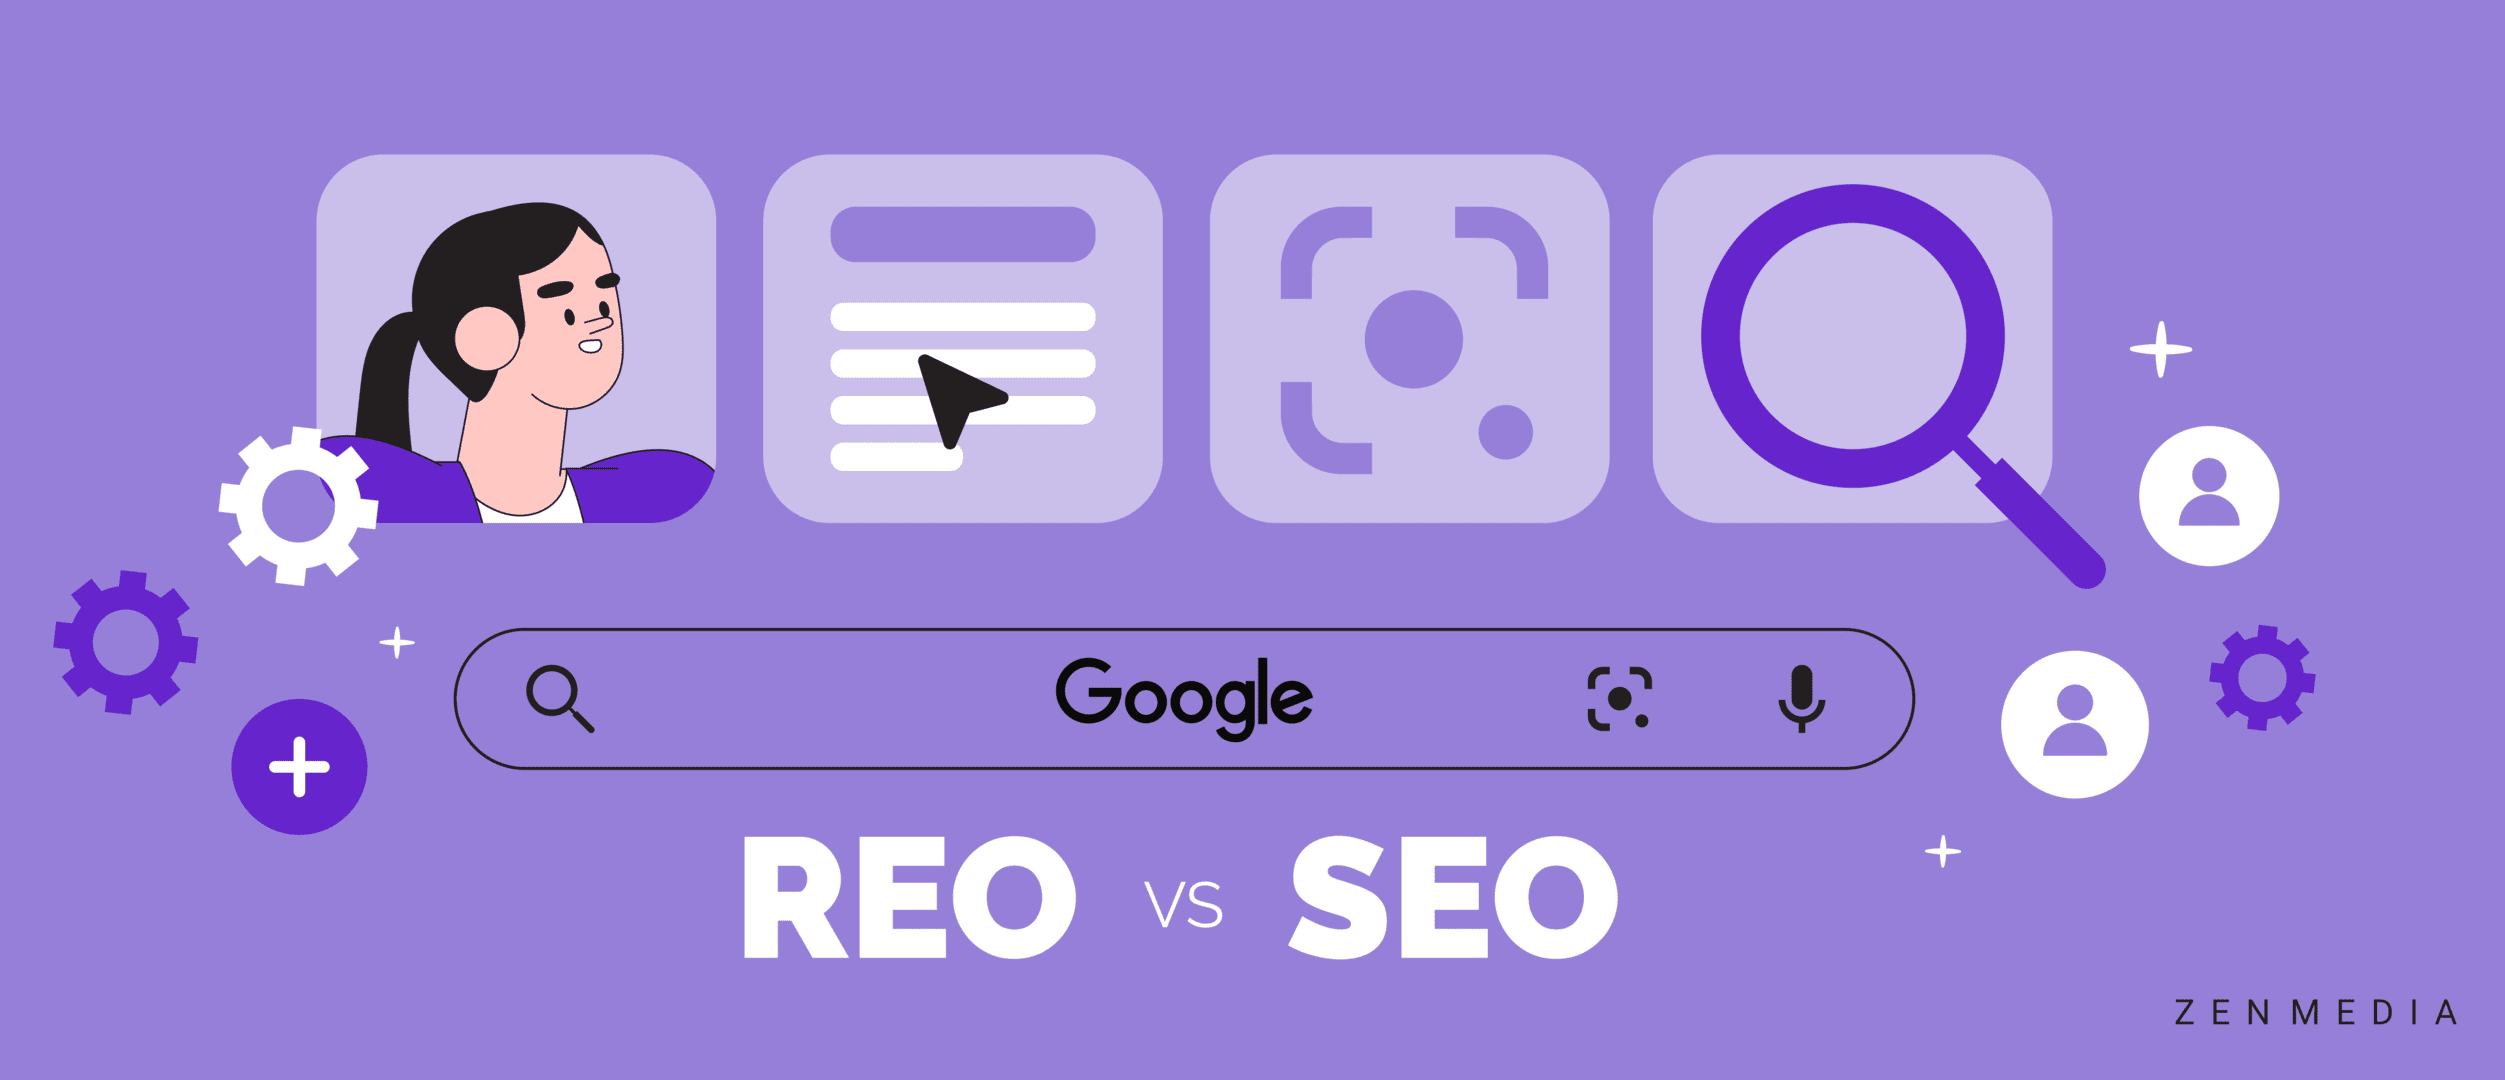 Understanding the Differences between REO and SEO